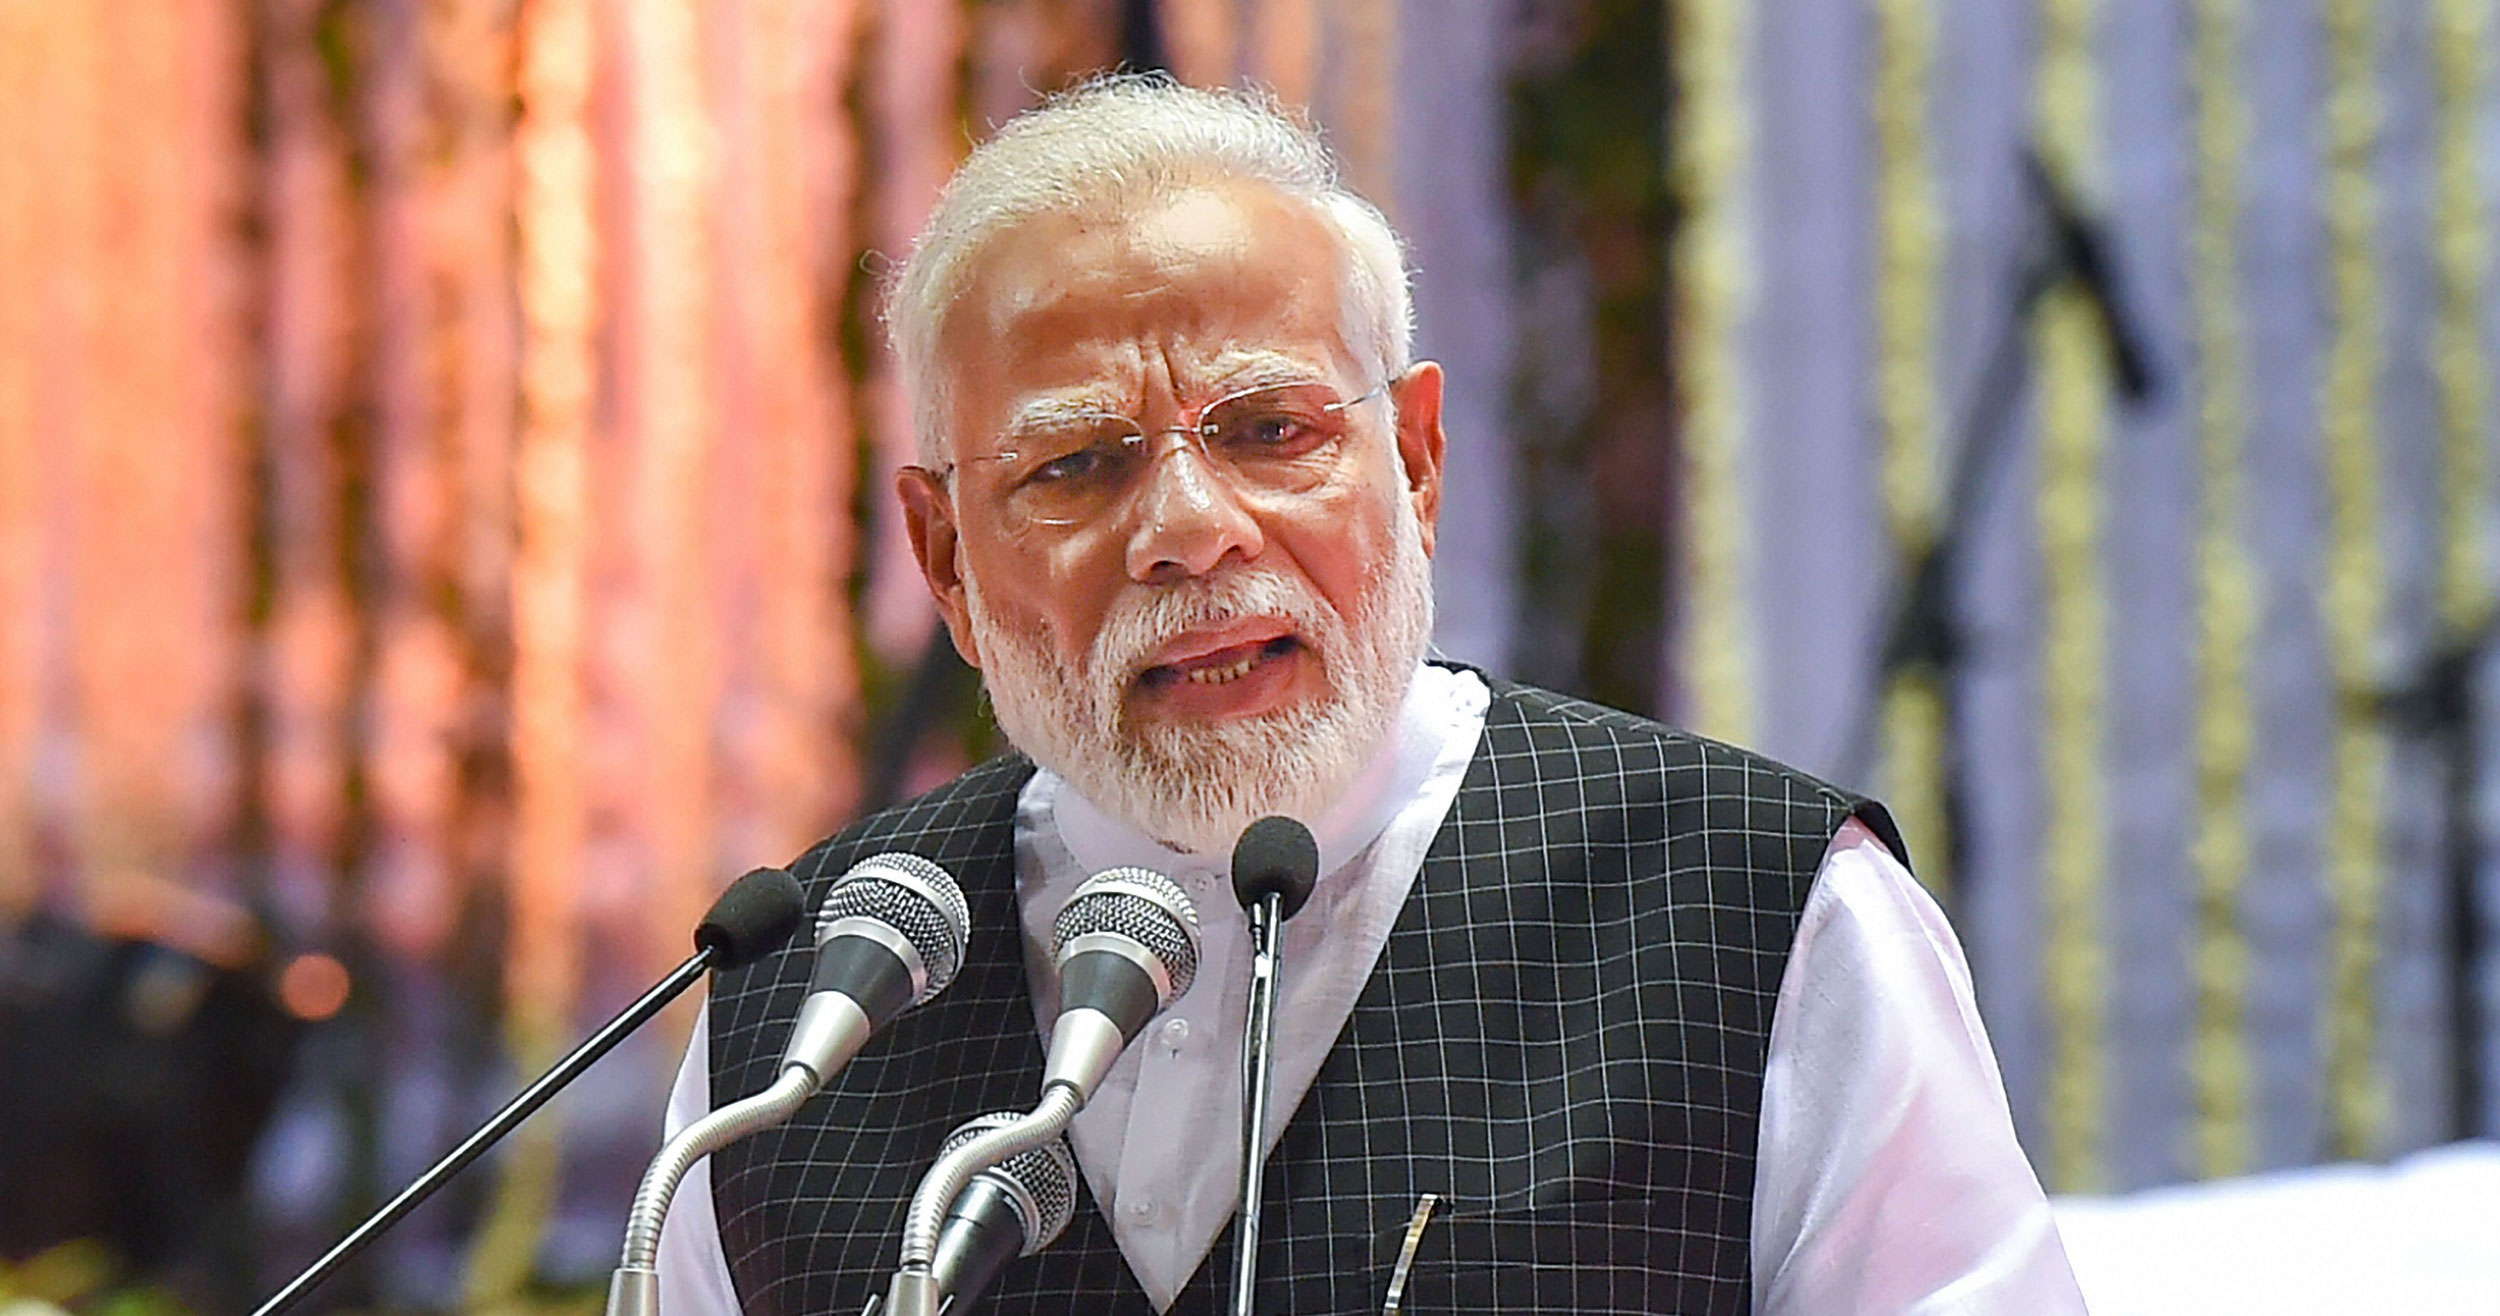 Prime Minister Narendra Modi claimed on October 2 that rural India has achieved open-defecation-free status